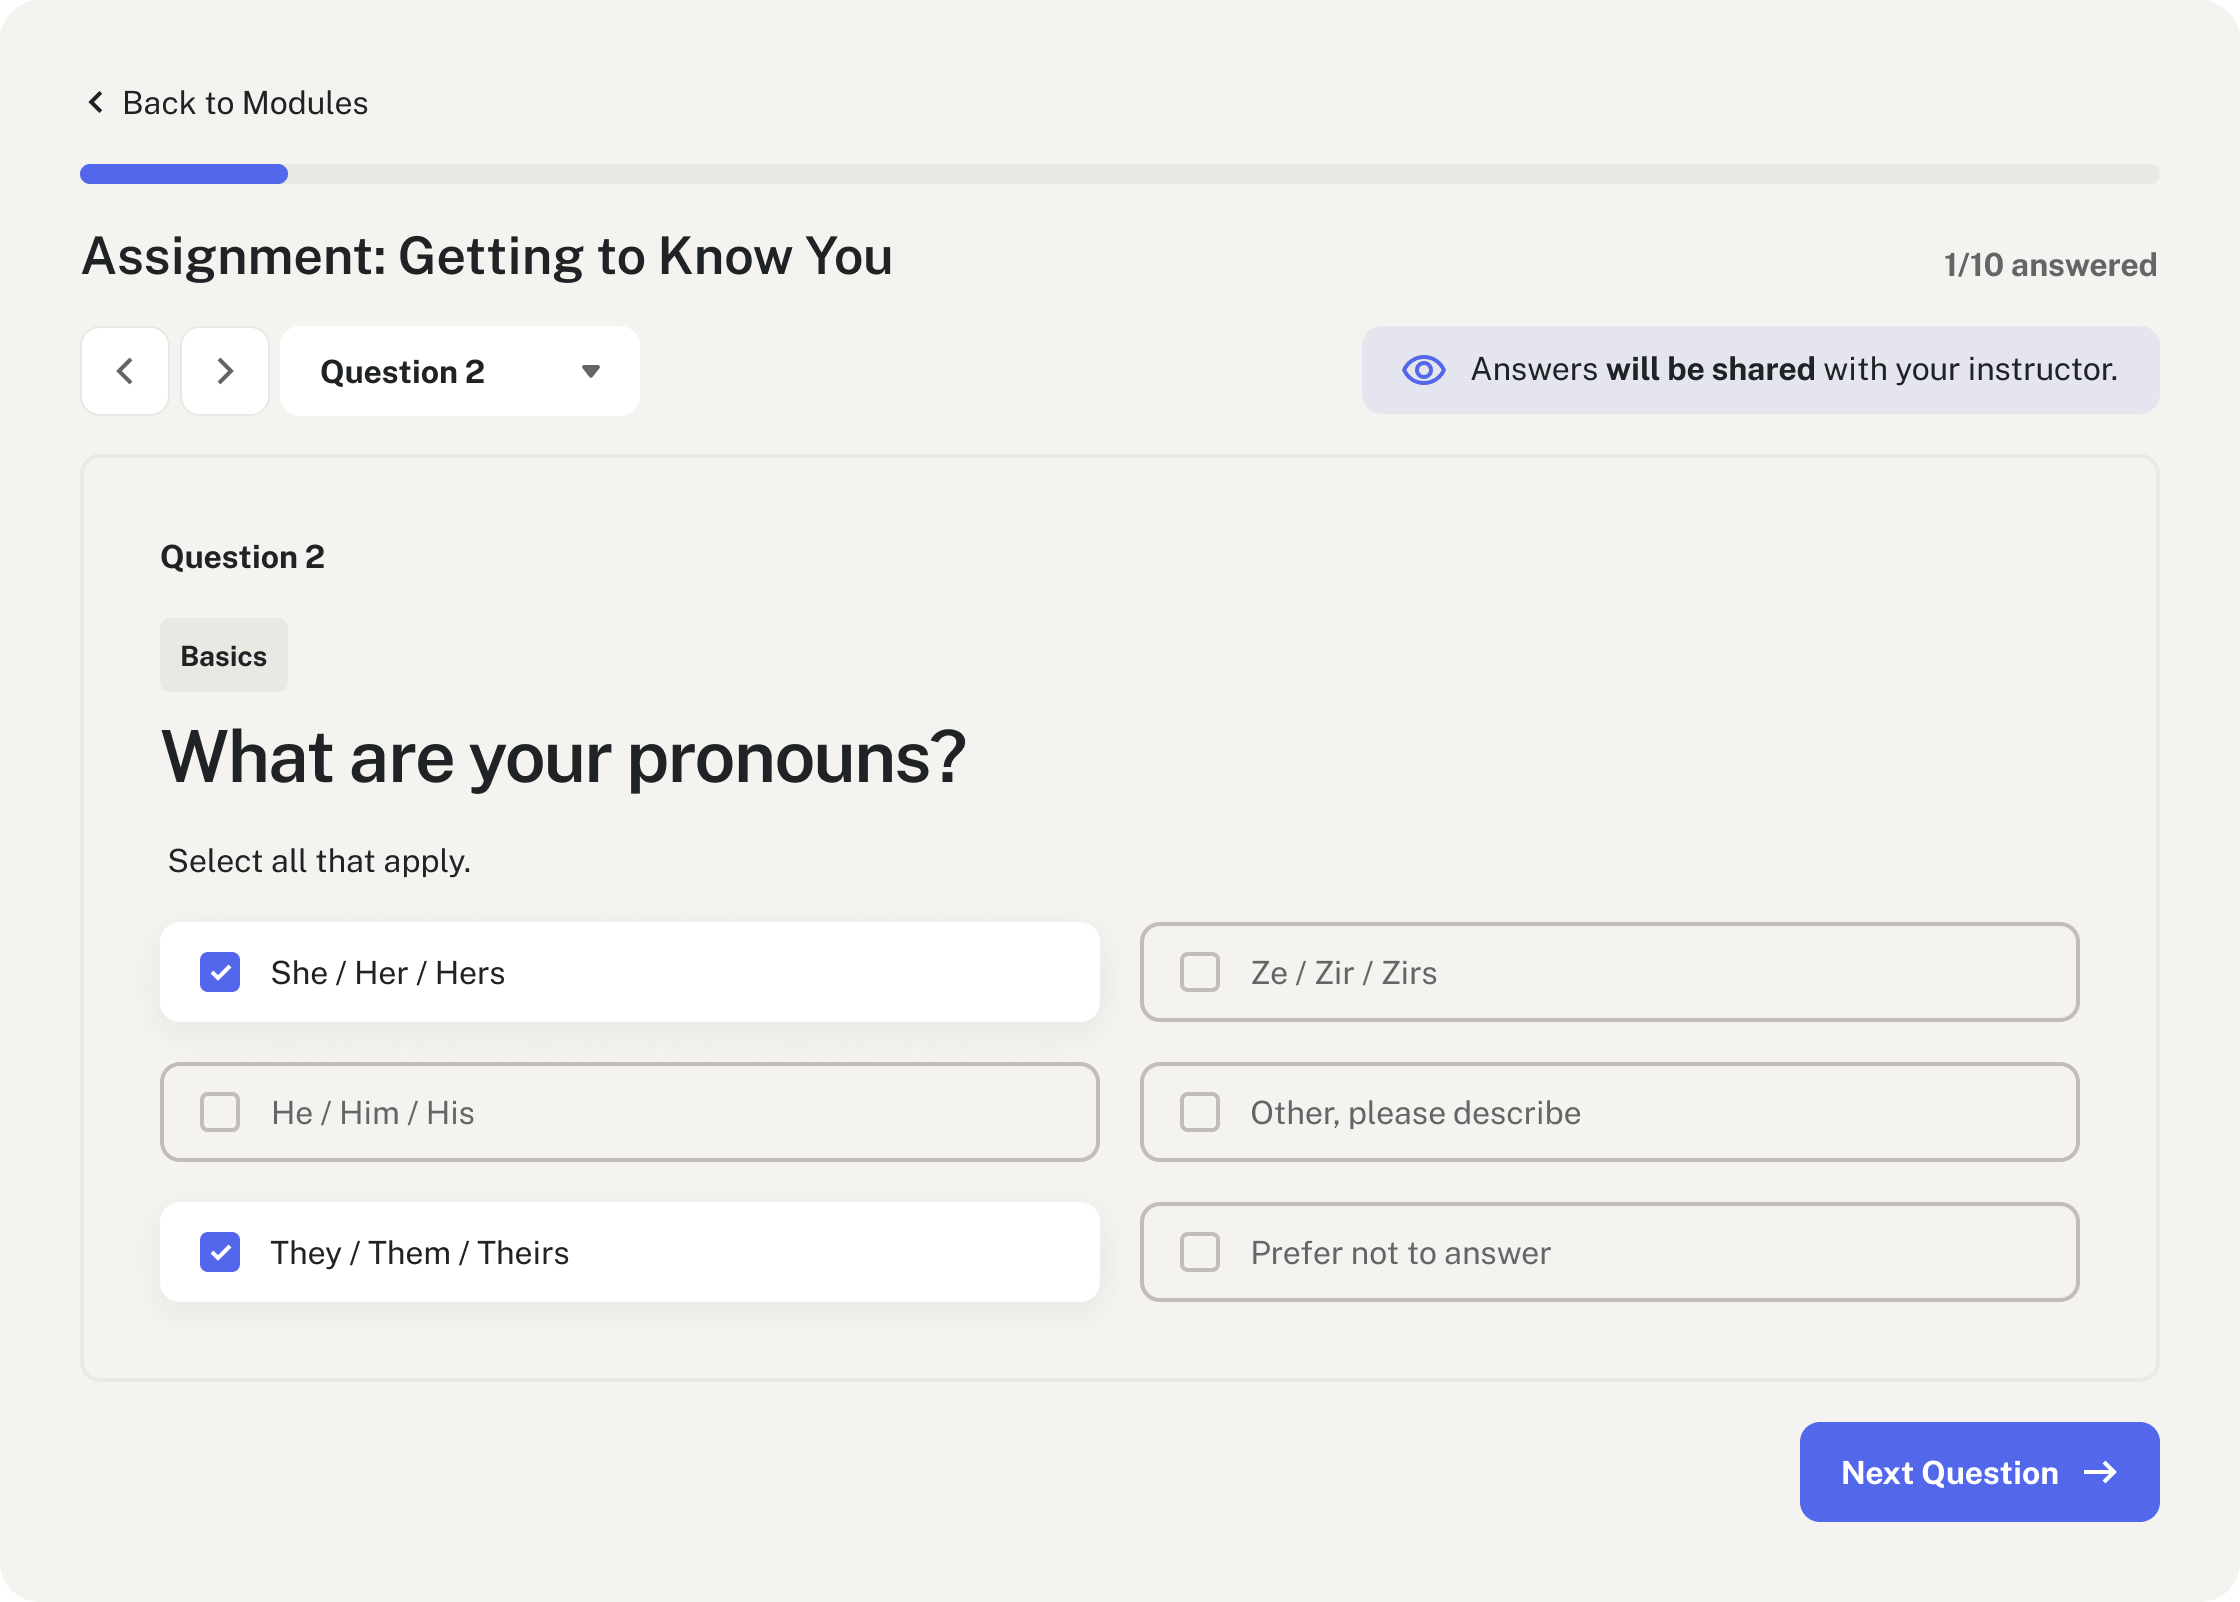 The pronouns section of the Lumen introductory questionnaire.